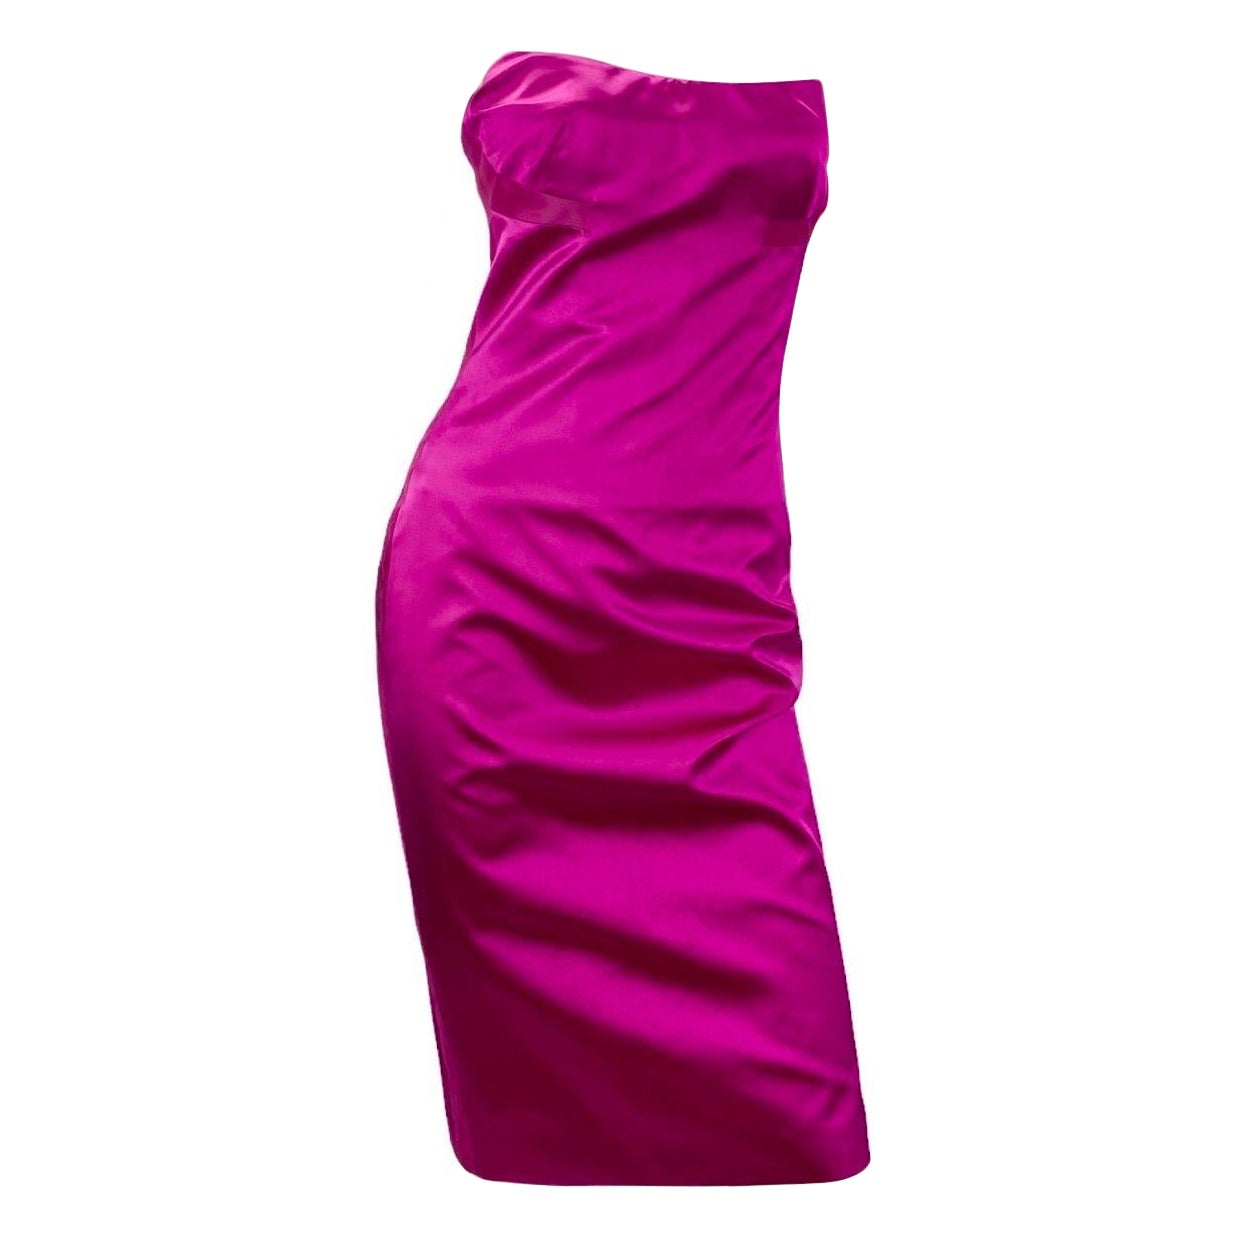 S/S 2001 Vintage Tom Ford for Gucci Hot Pink Strapless Dress For Sale